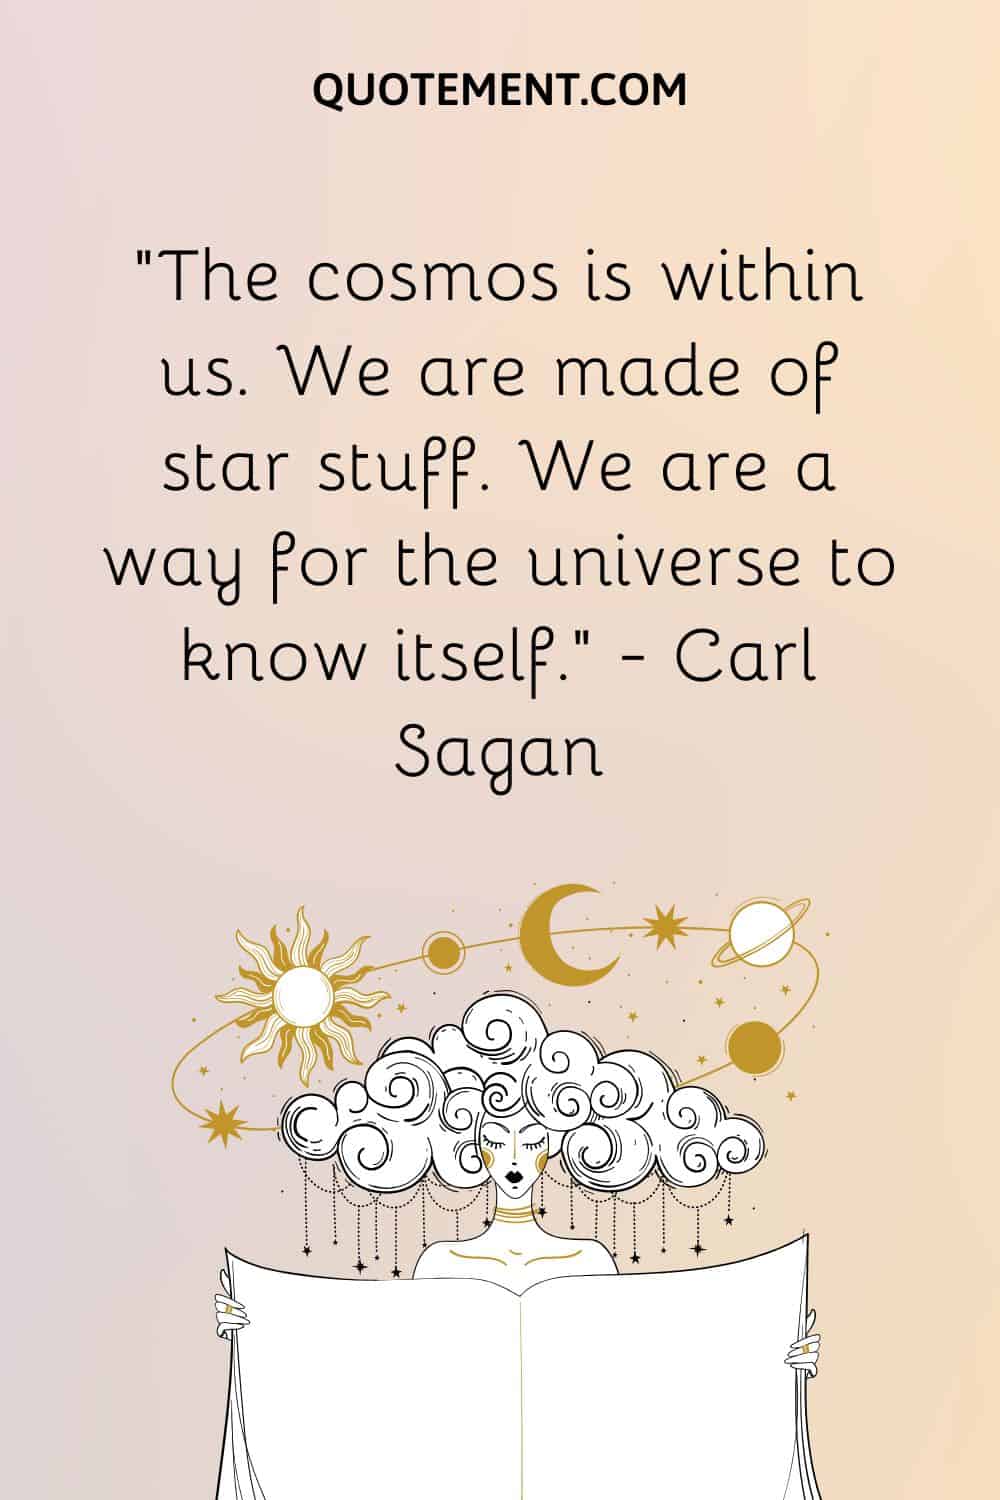 The cosmos is within us